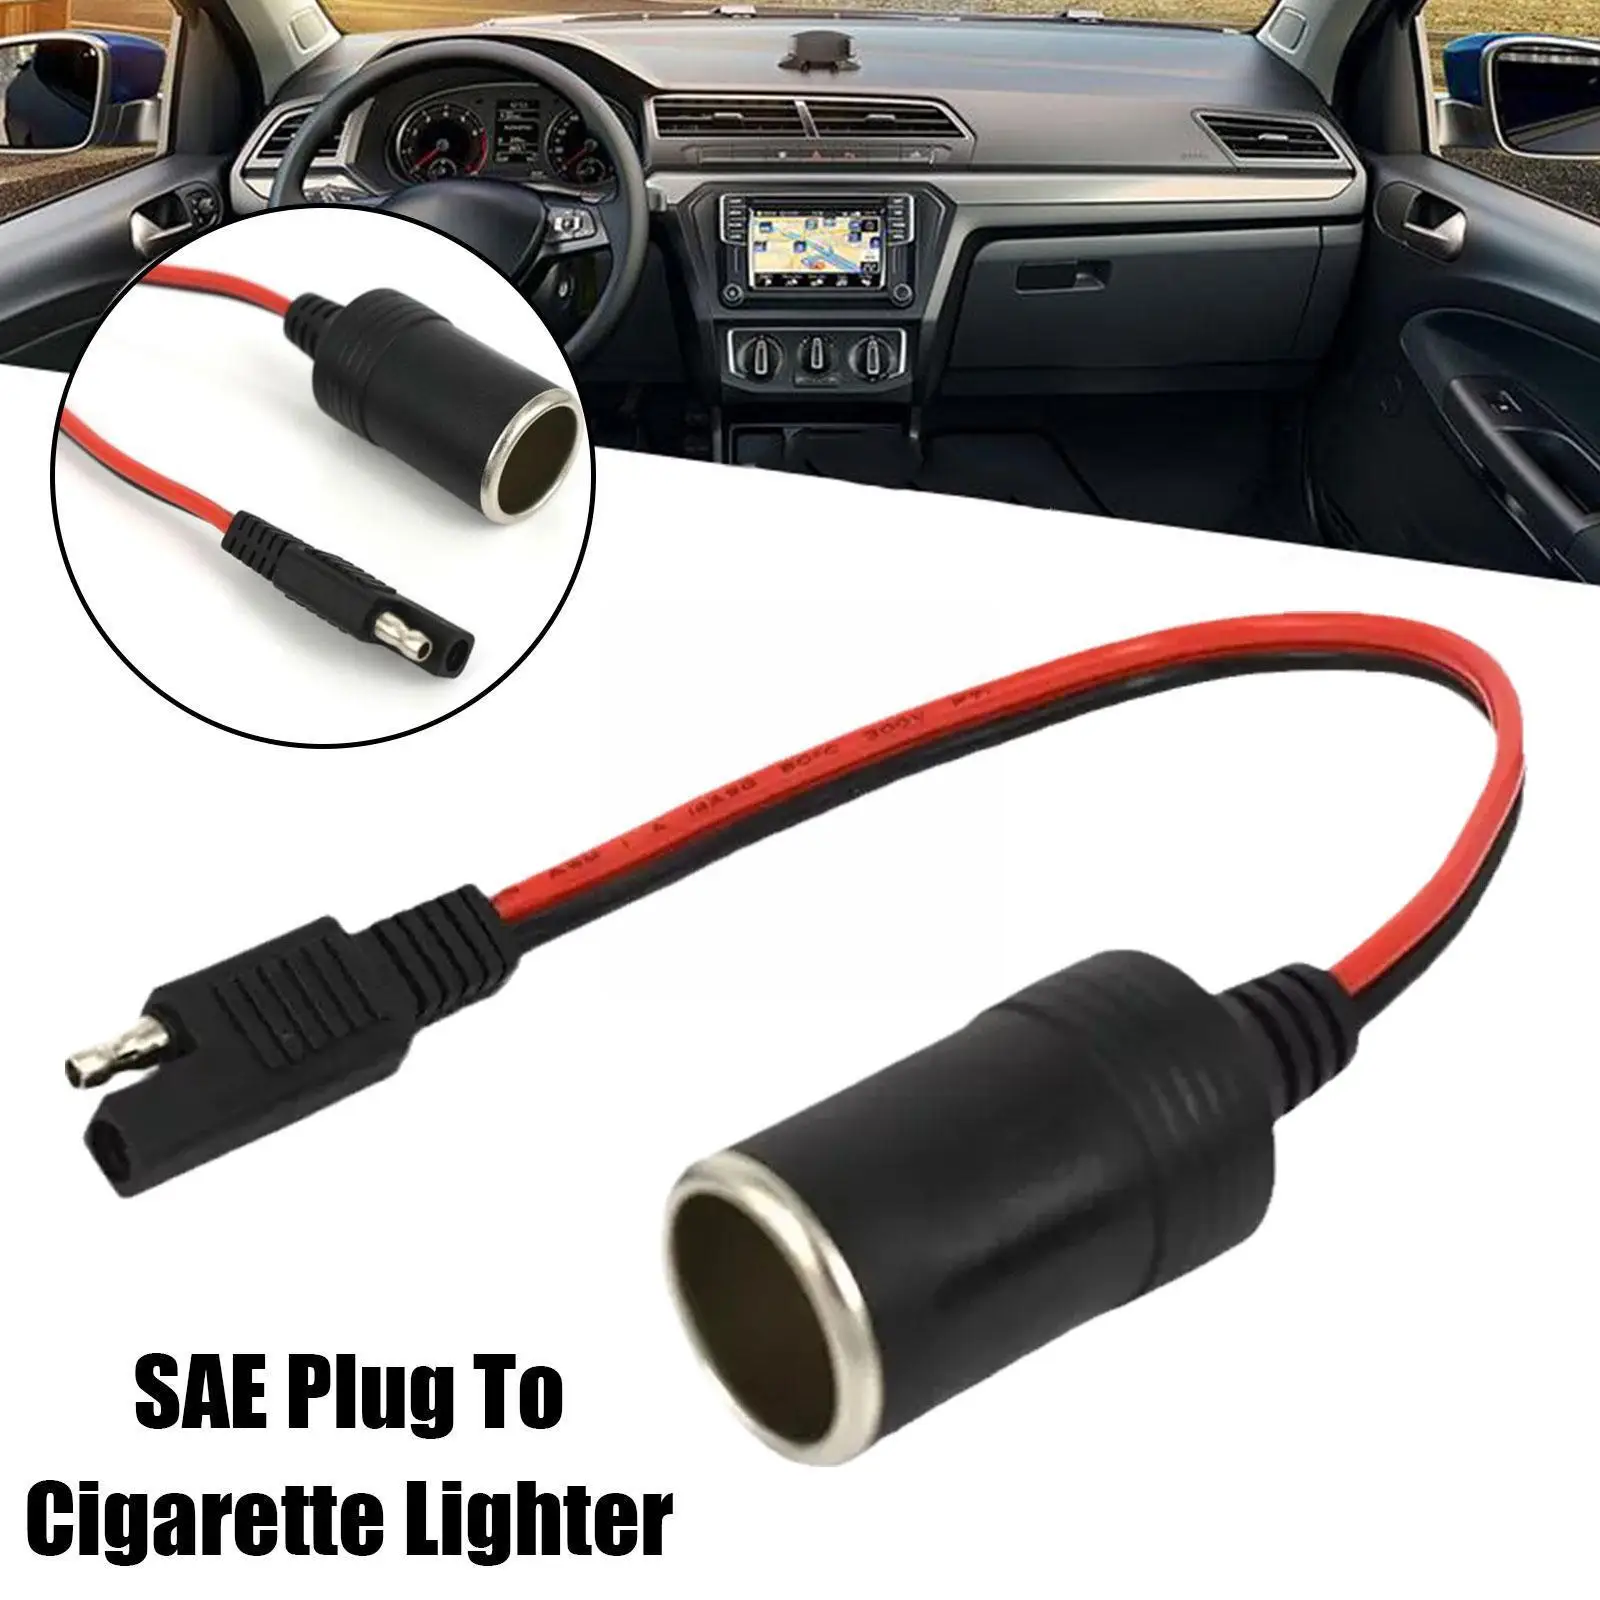 

14awg 30cm Female Cigarette Lighter Socket To Sae With Release Pin Quick Plug 2 Connector Disconnect Cable Extension O4v5